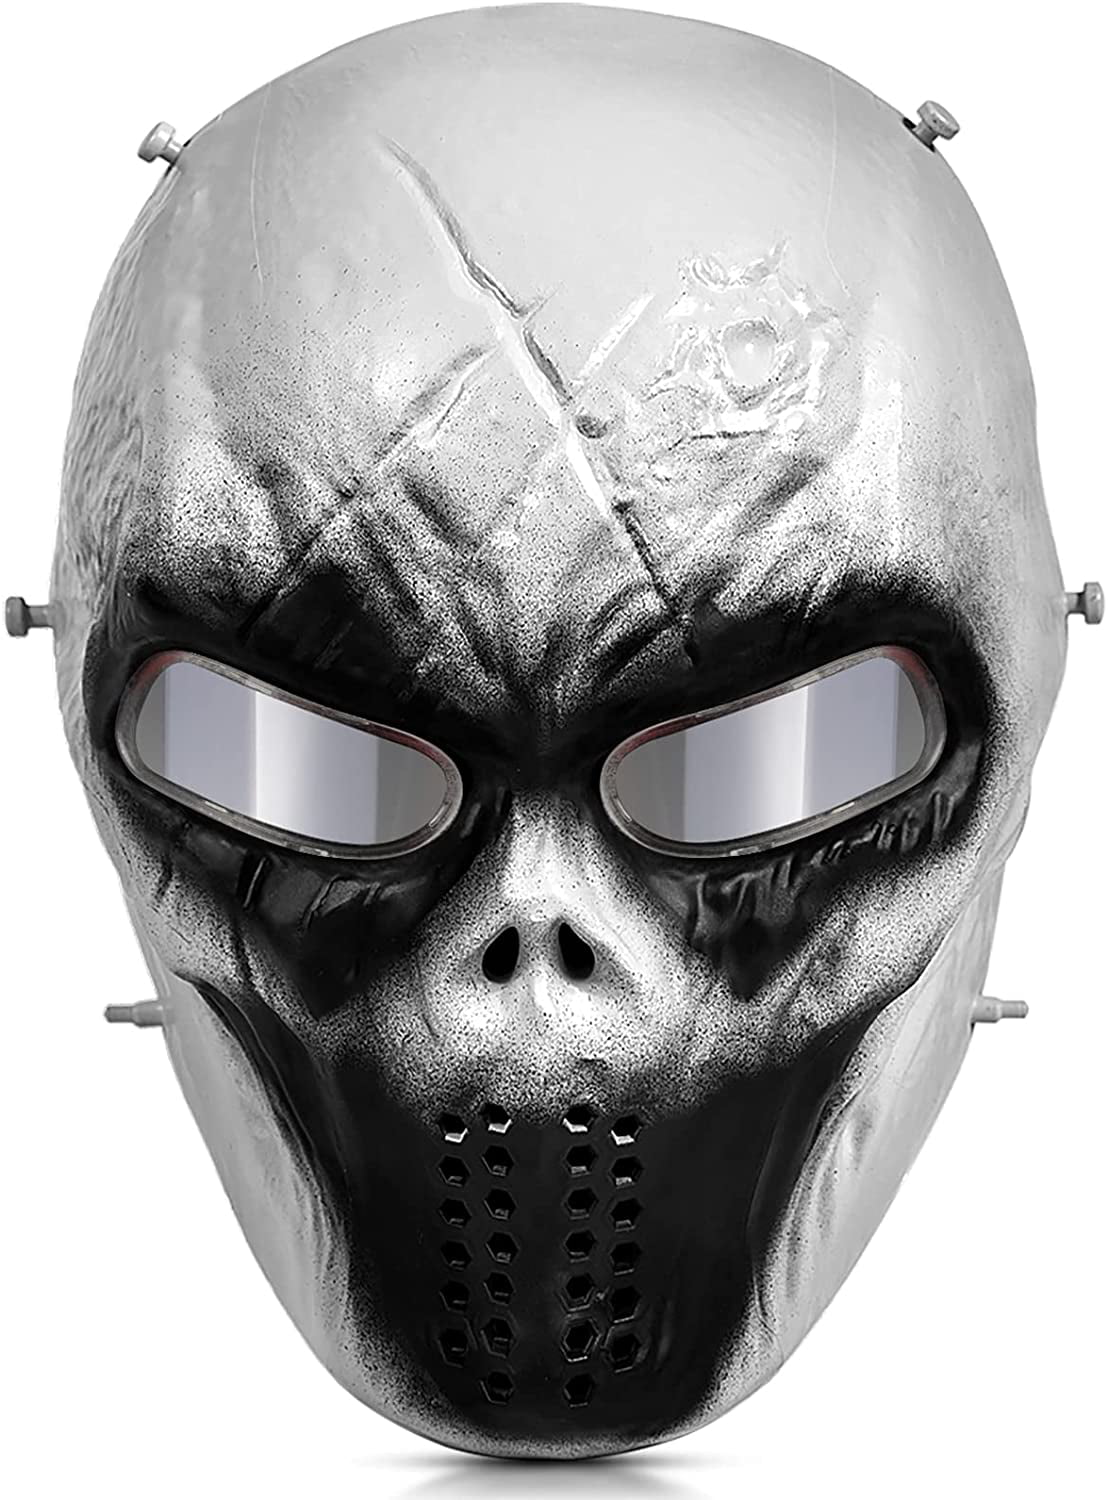 OutdoorMaster Full Face Airsoft Mask with Metal Mesh Eye Protection 